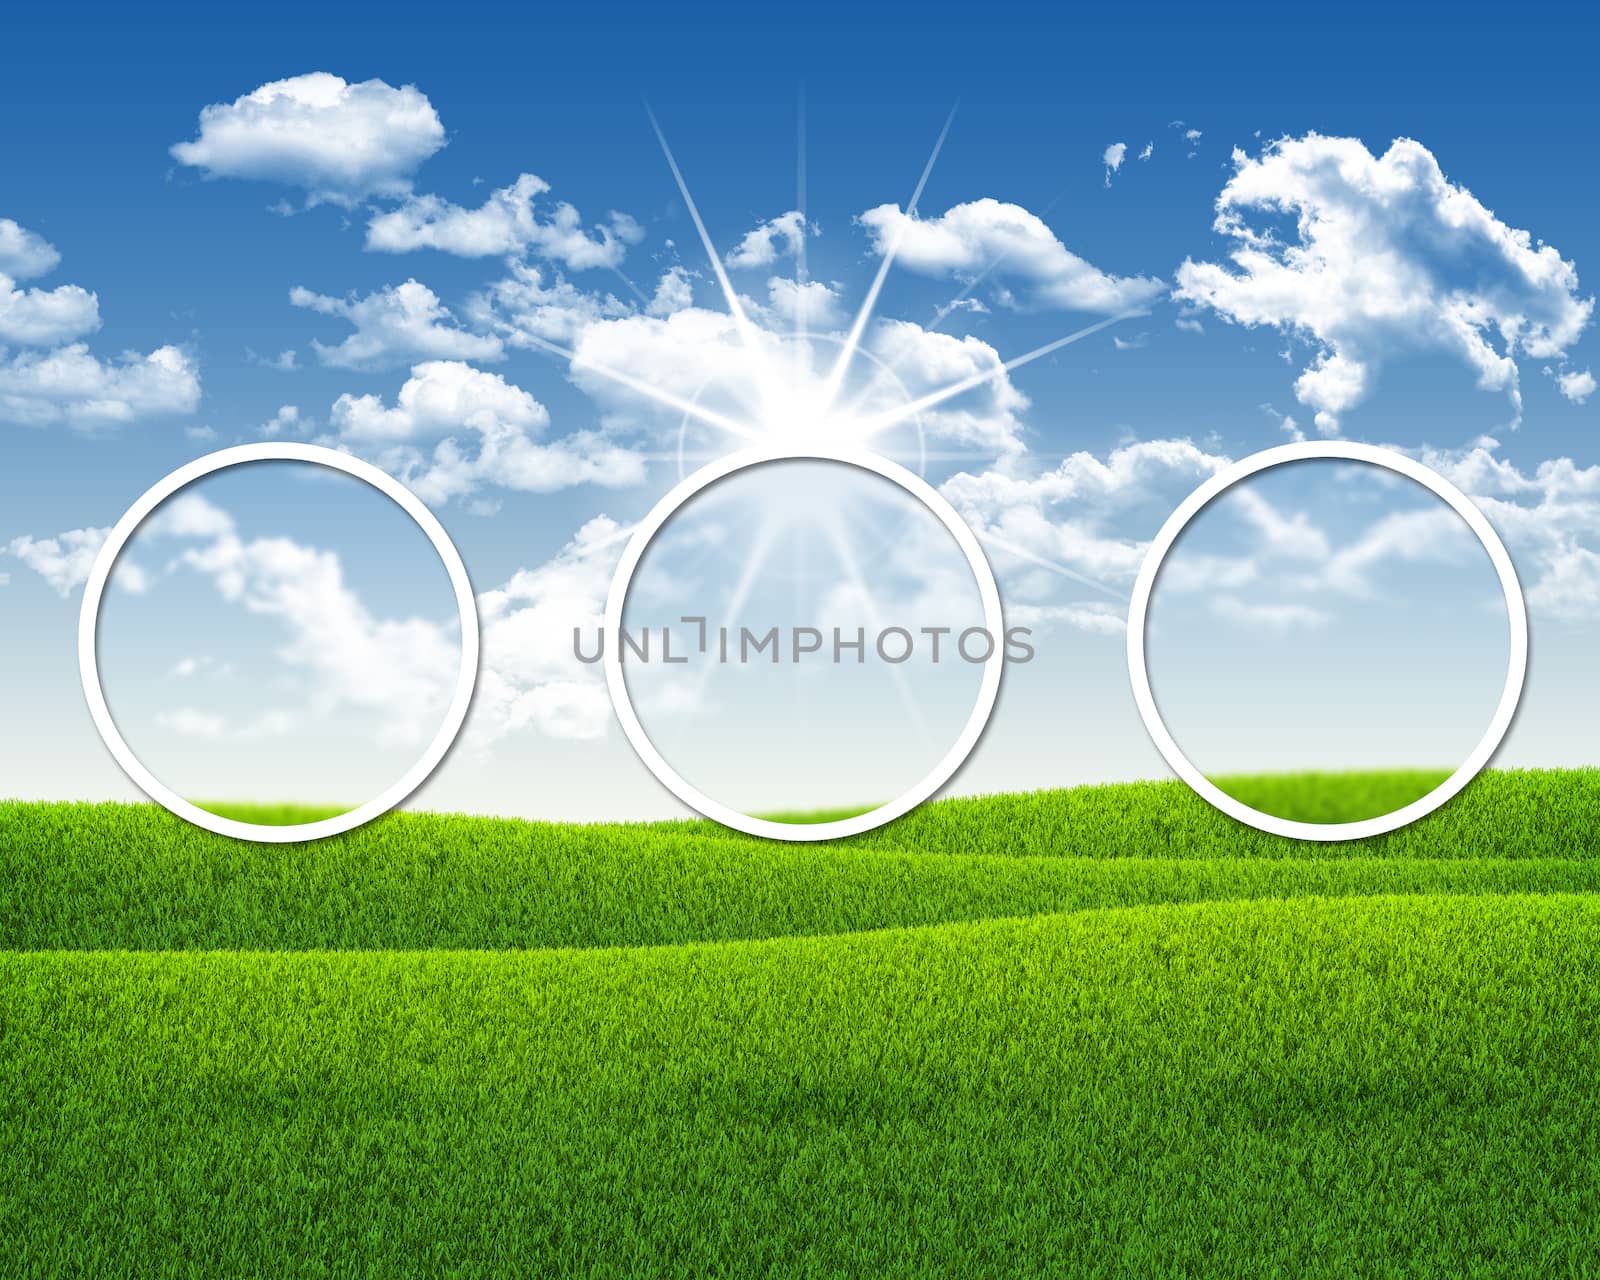 Three white circles. Green grass and blue sky as backdrop